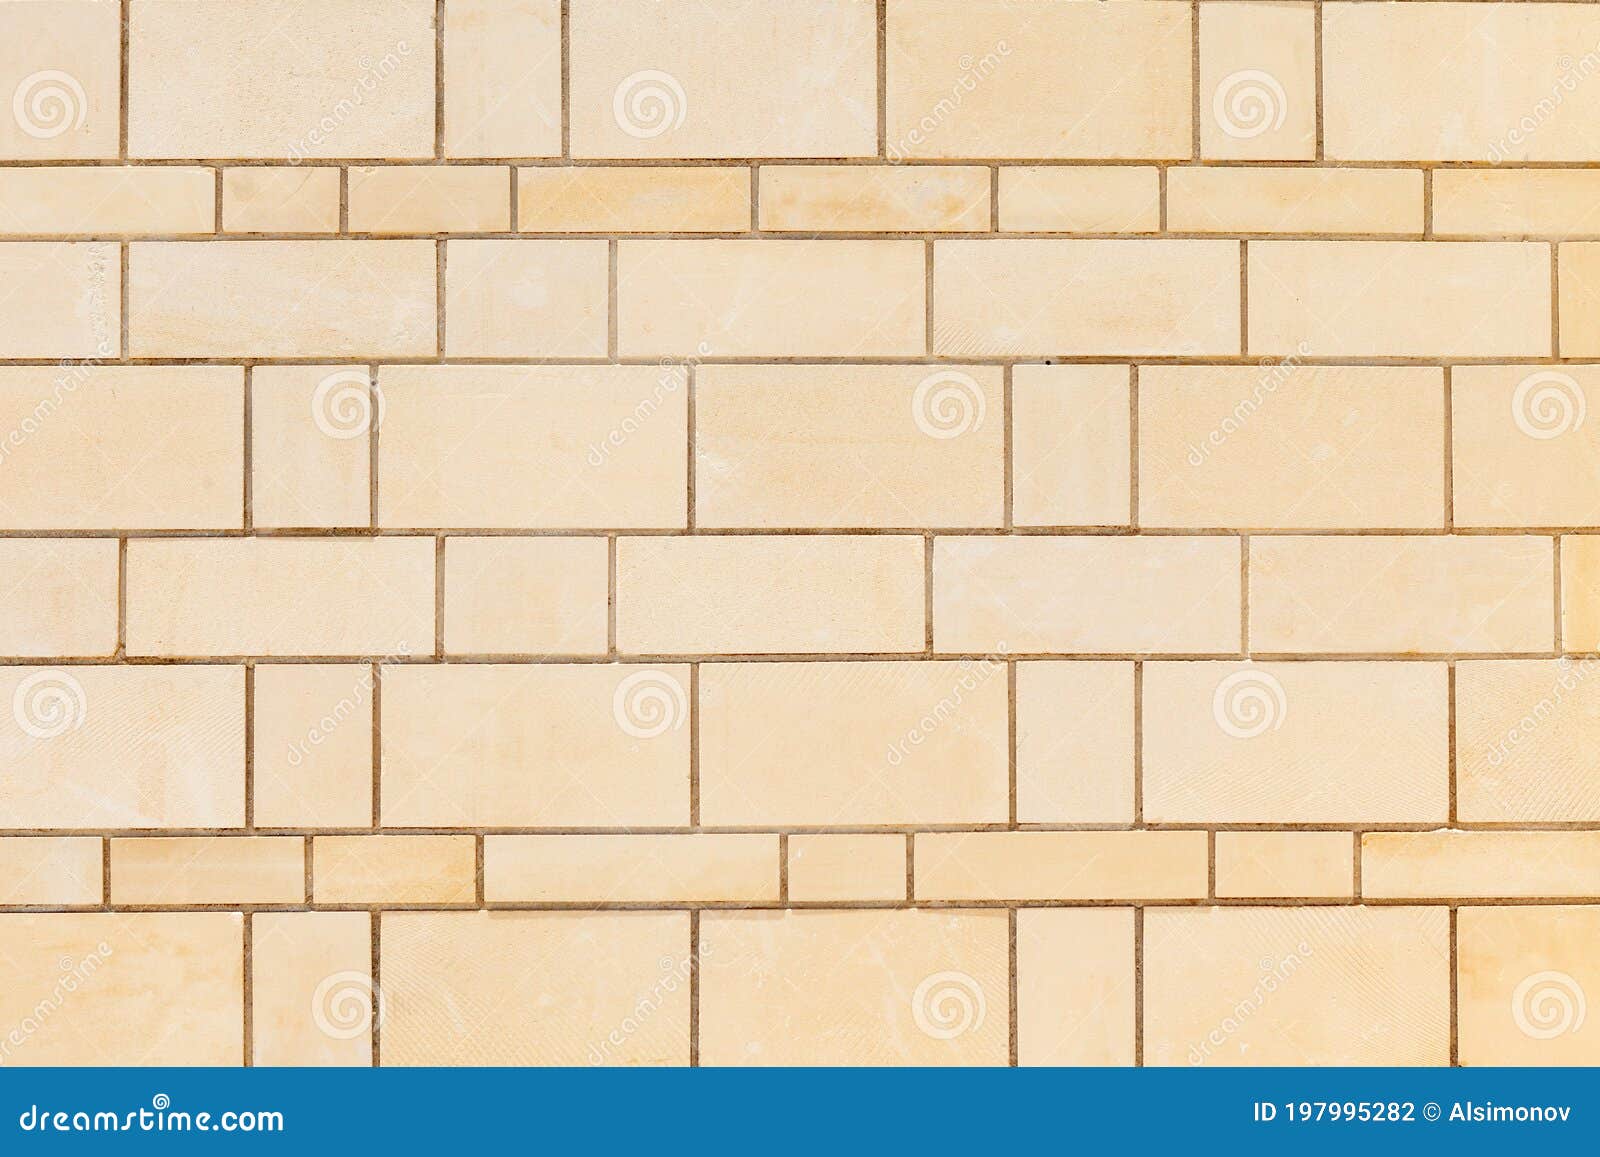 wall made of smooth, rectangular yellow sandstone blocks. background image, texture